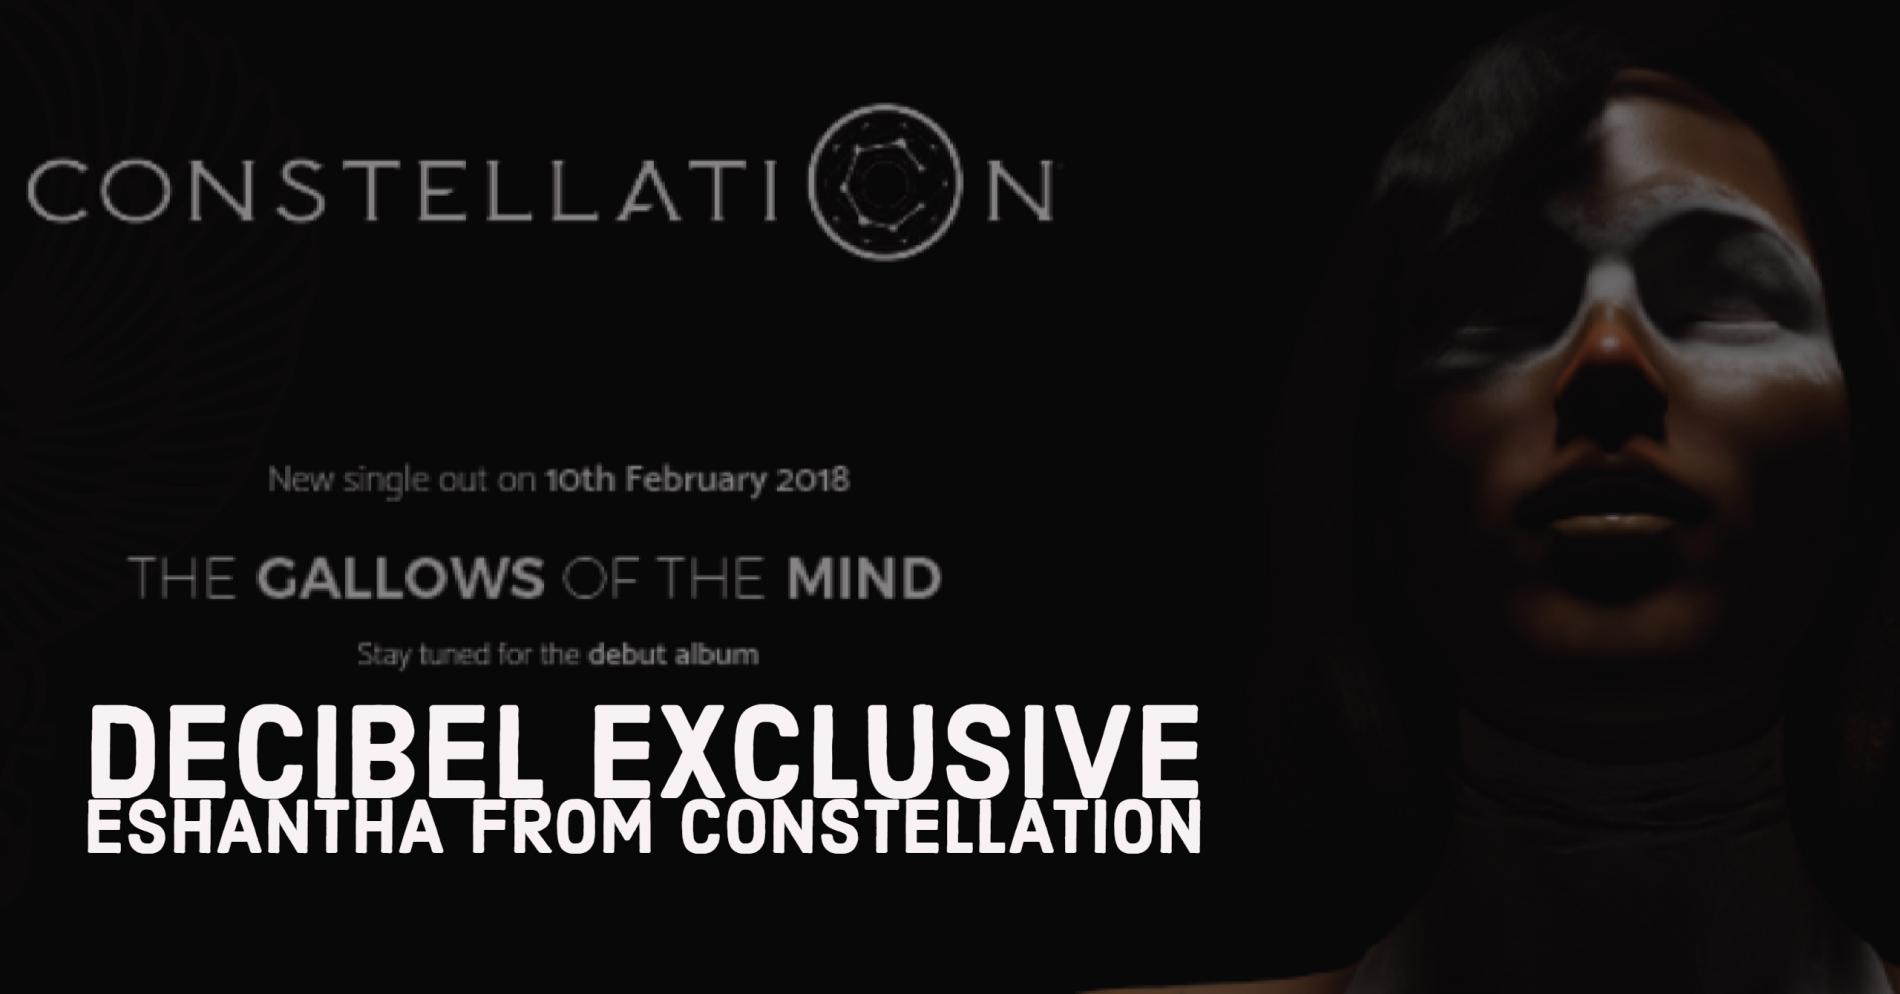 Constellation Is On The Verge Of Releasing New Music, Here’s Eshantha With The Scoop